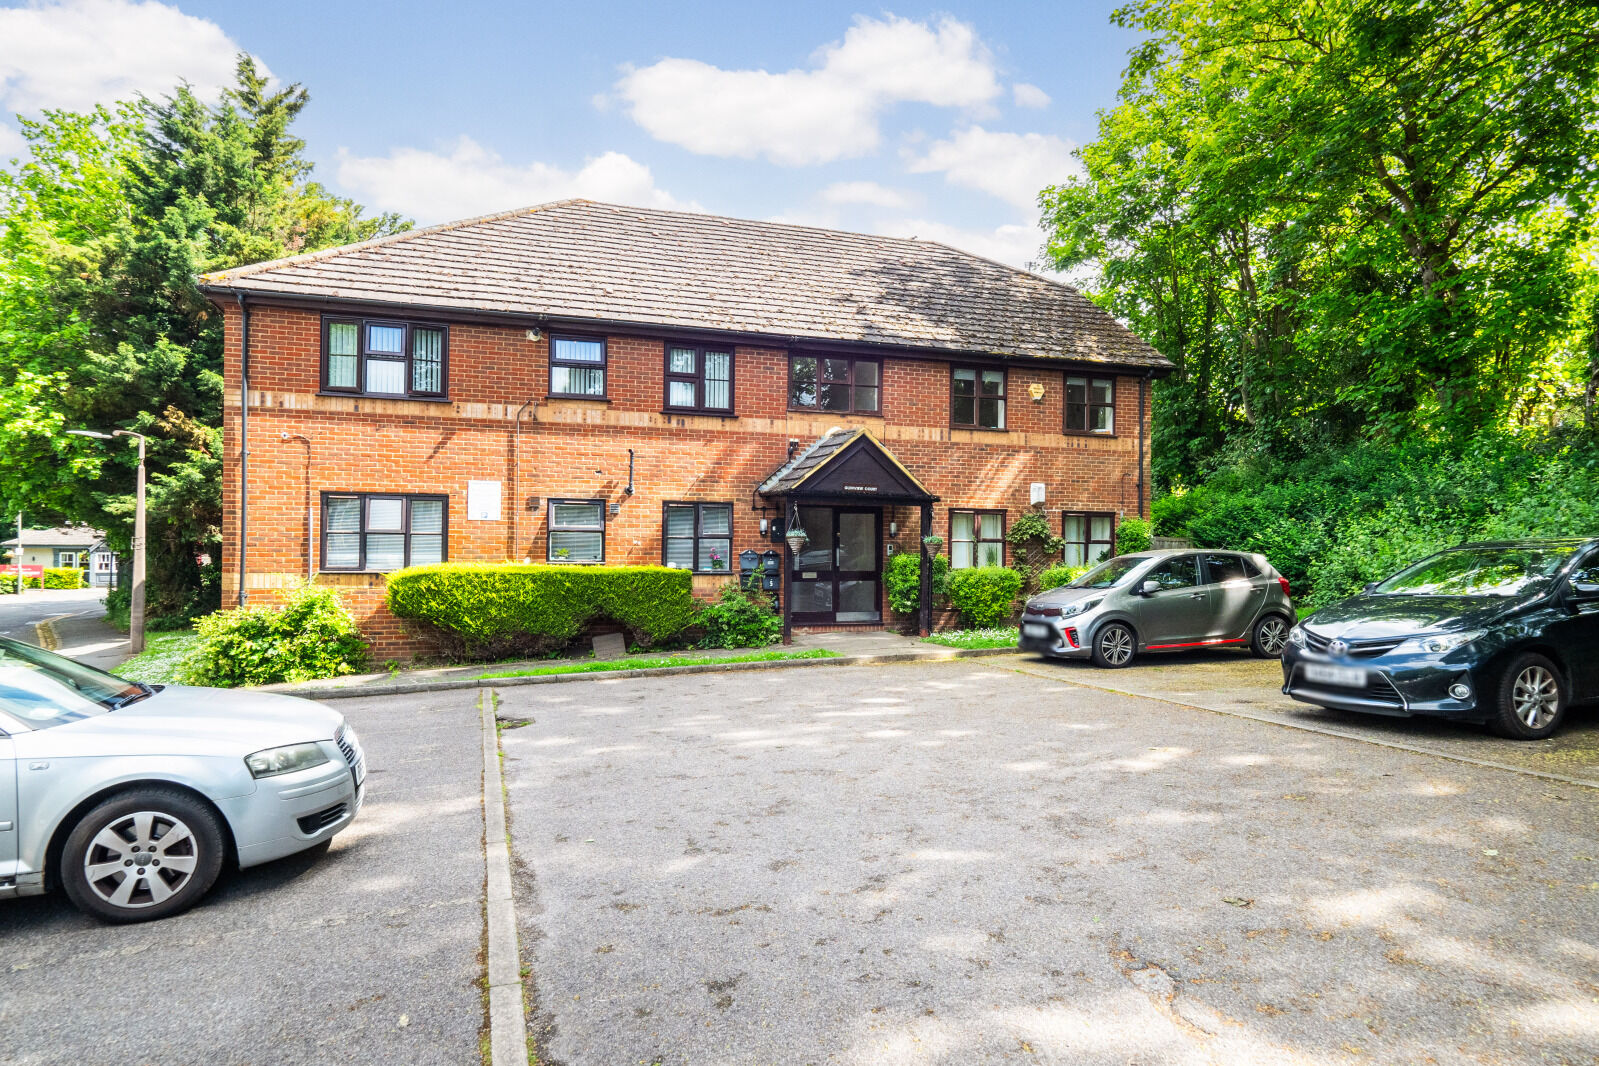 2 bedroom  flat for sale Station Approach, Ewell, KT17, main image